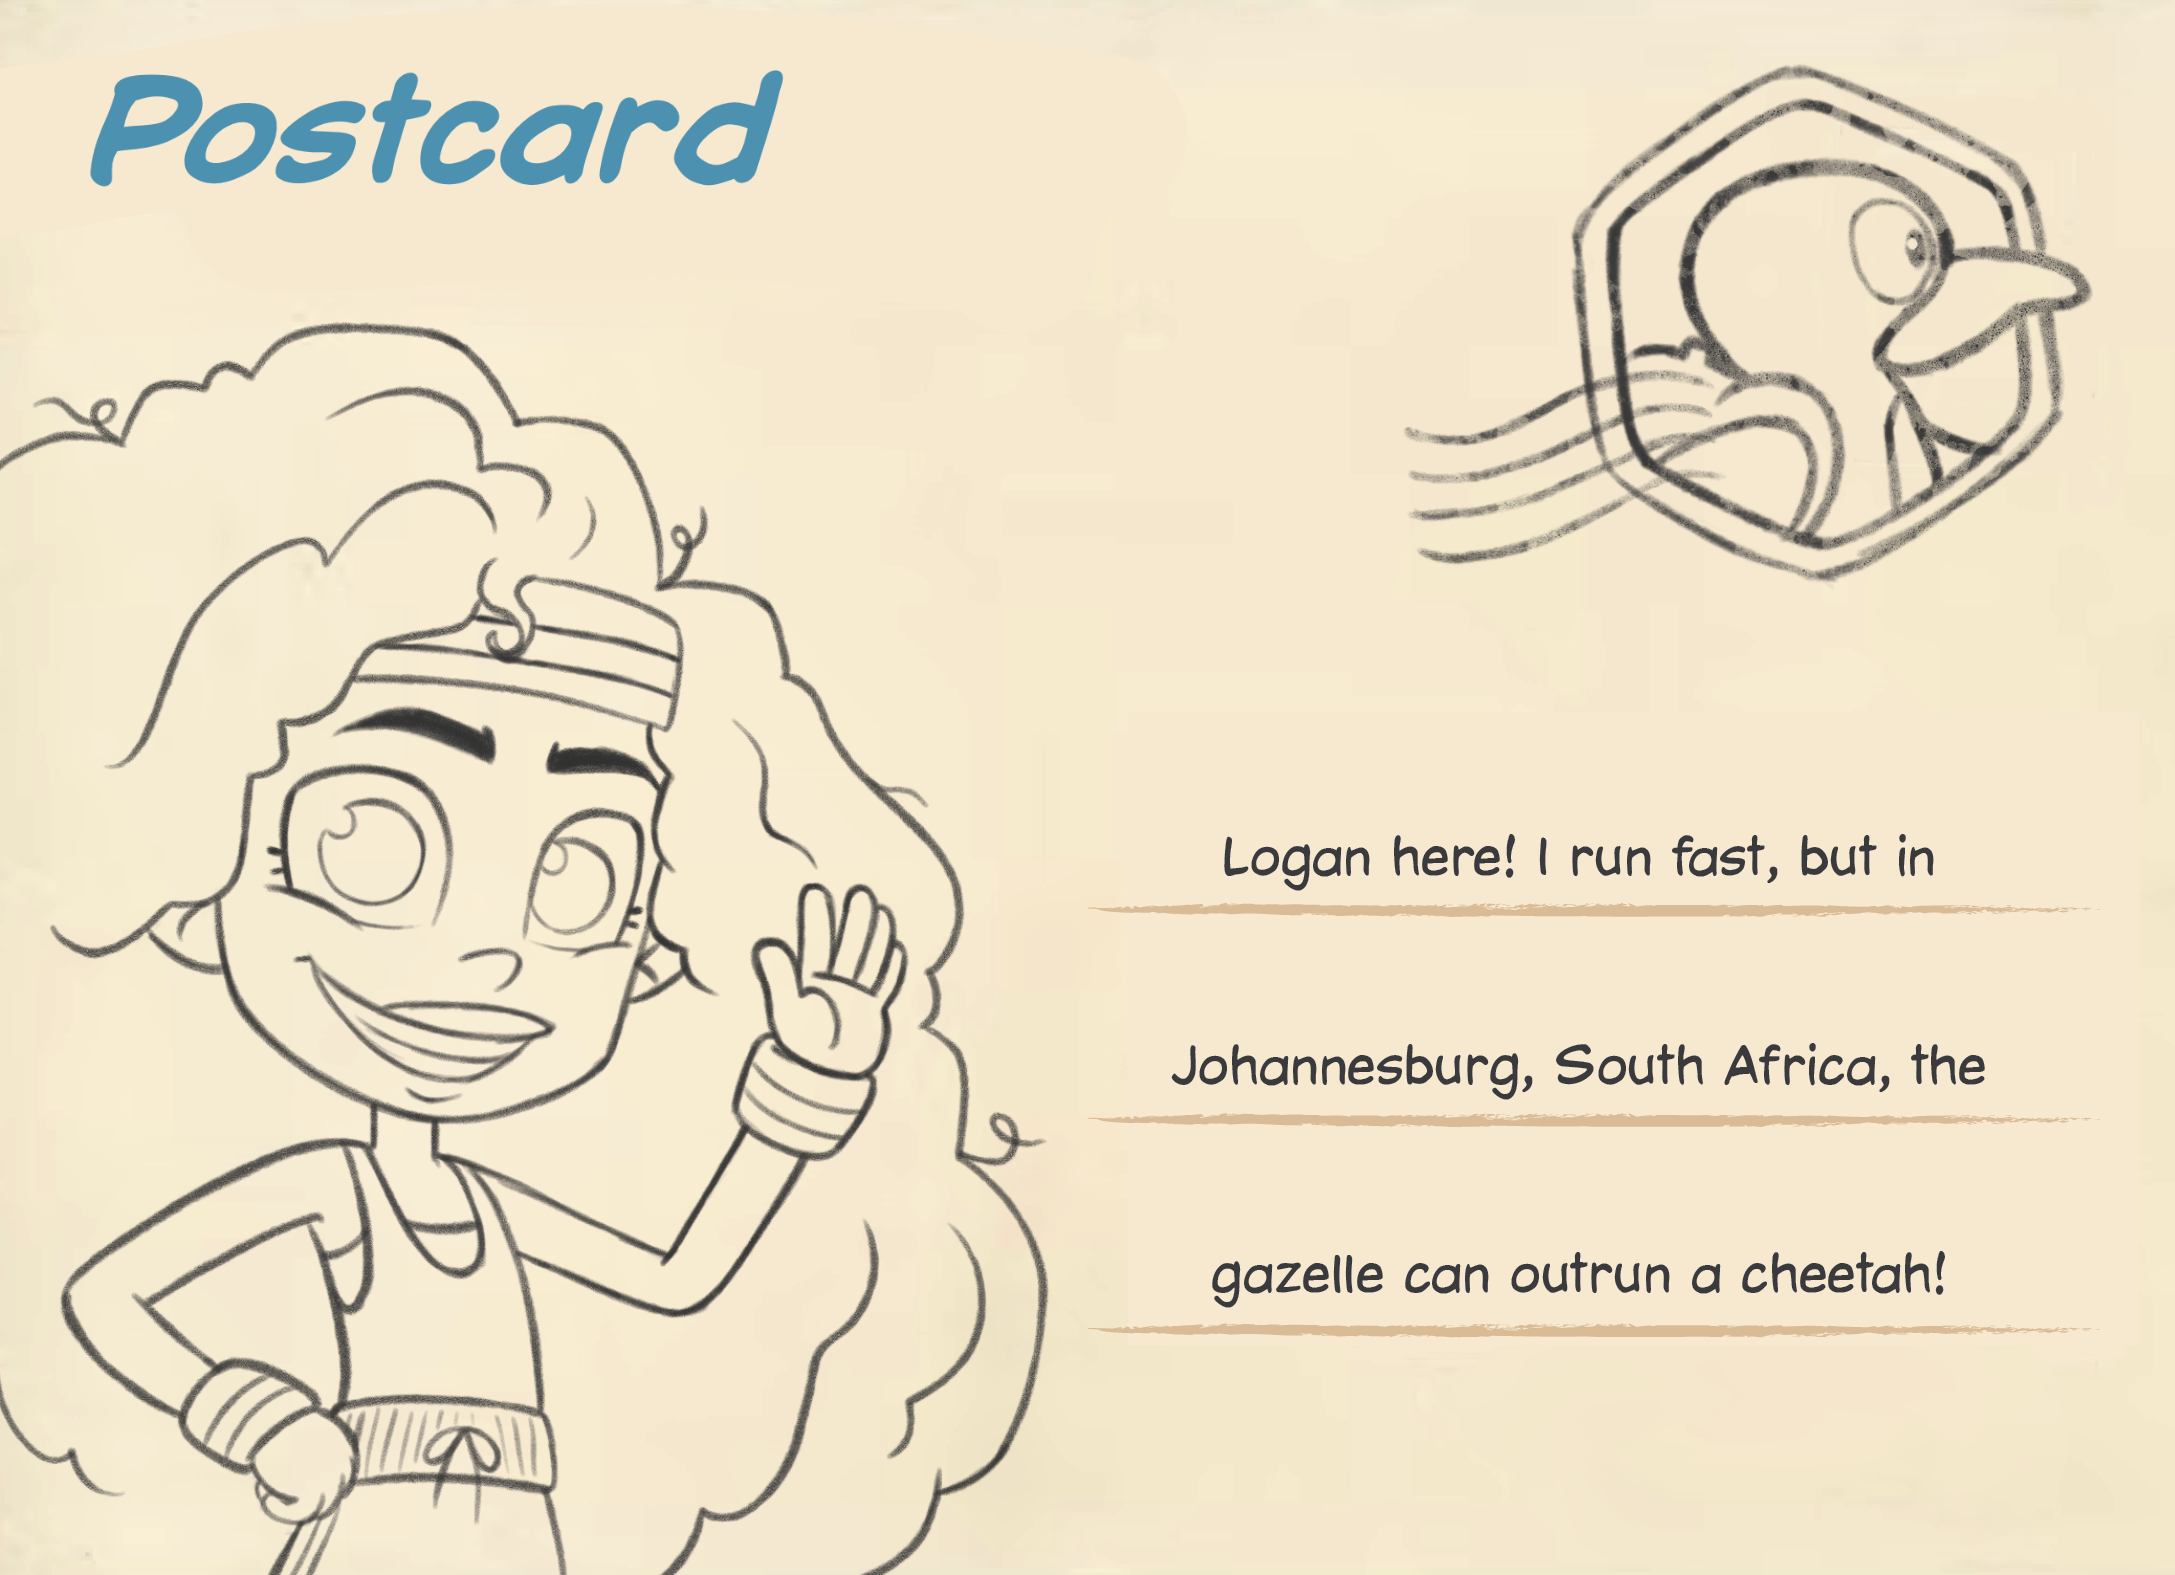 A postcard with Logan here! I run fast, but in Johannesburg South Africa, the gazelle can outrun a cheetah! written on it